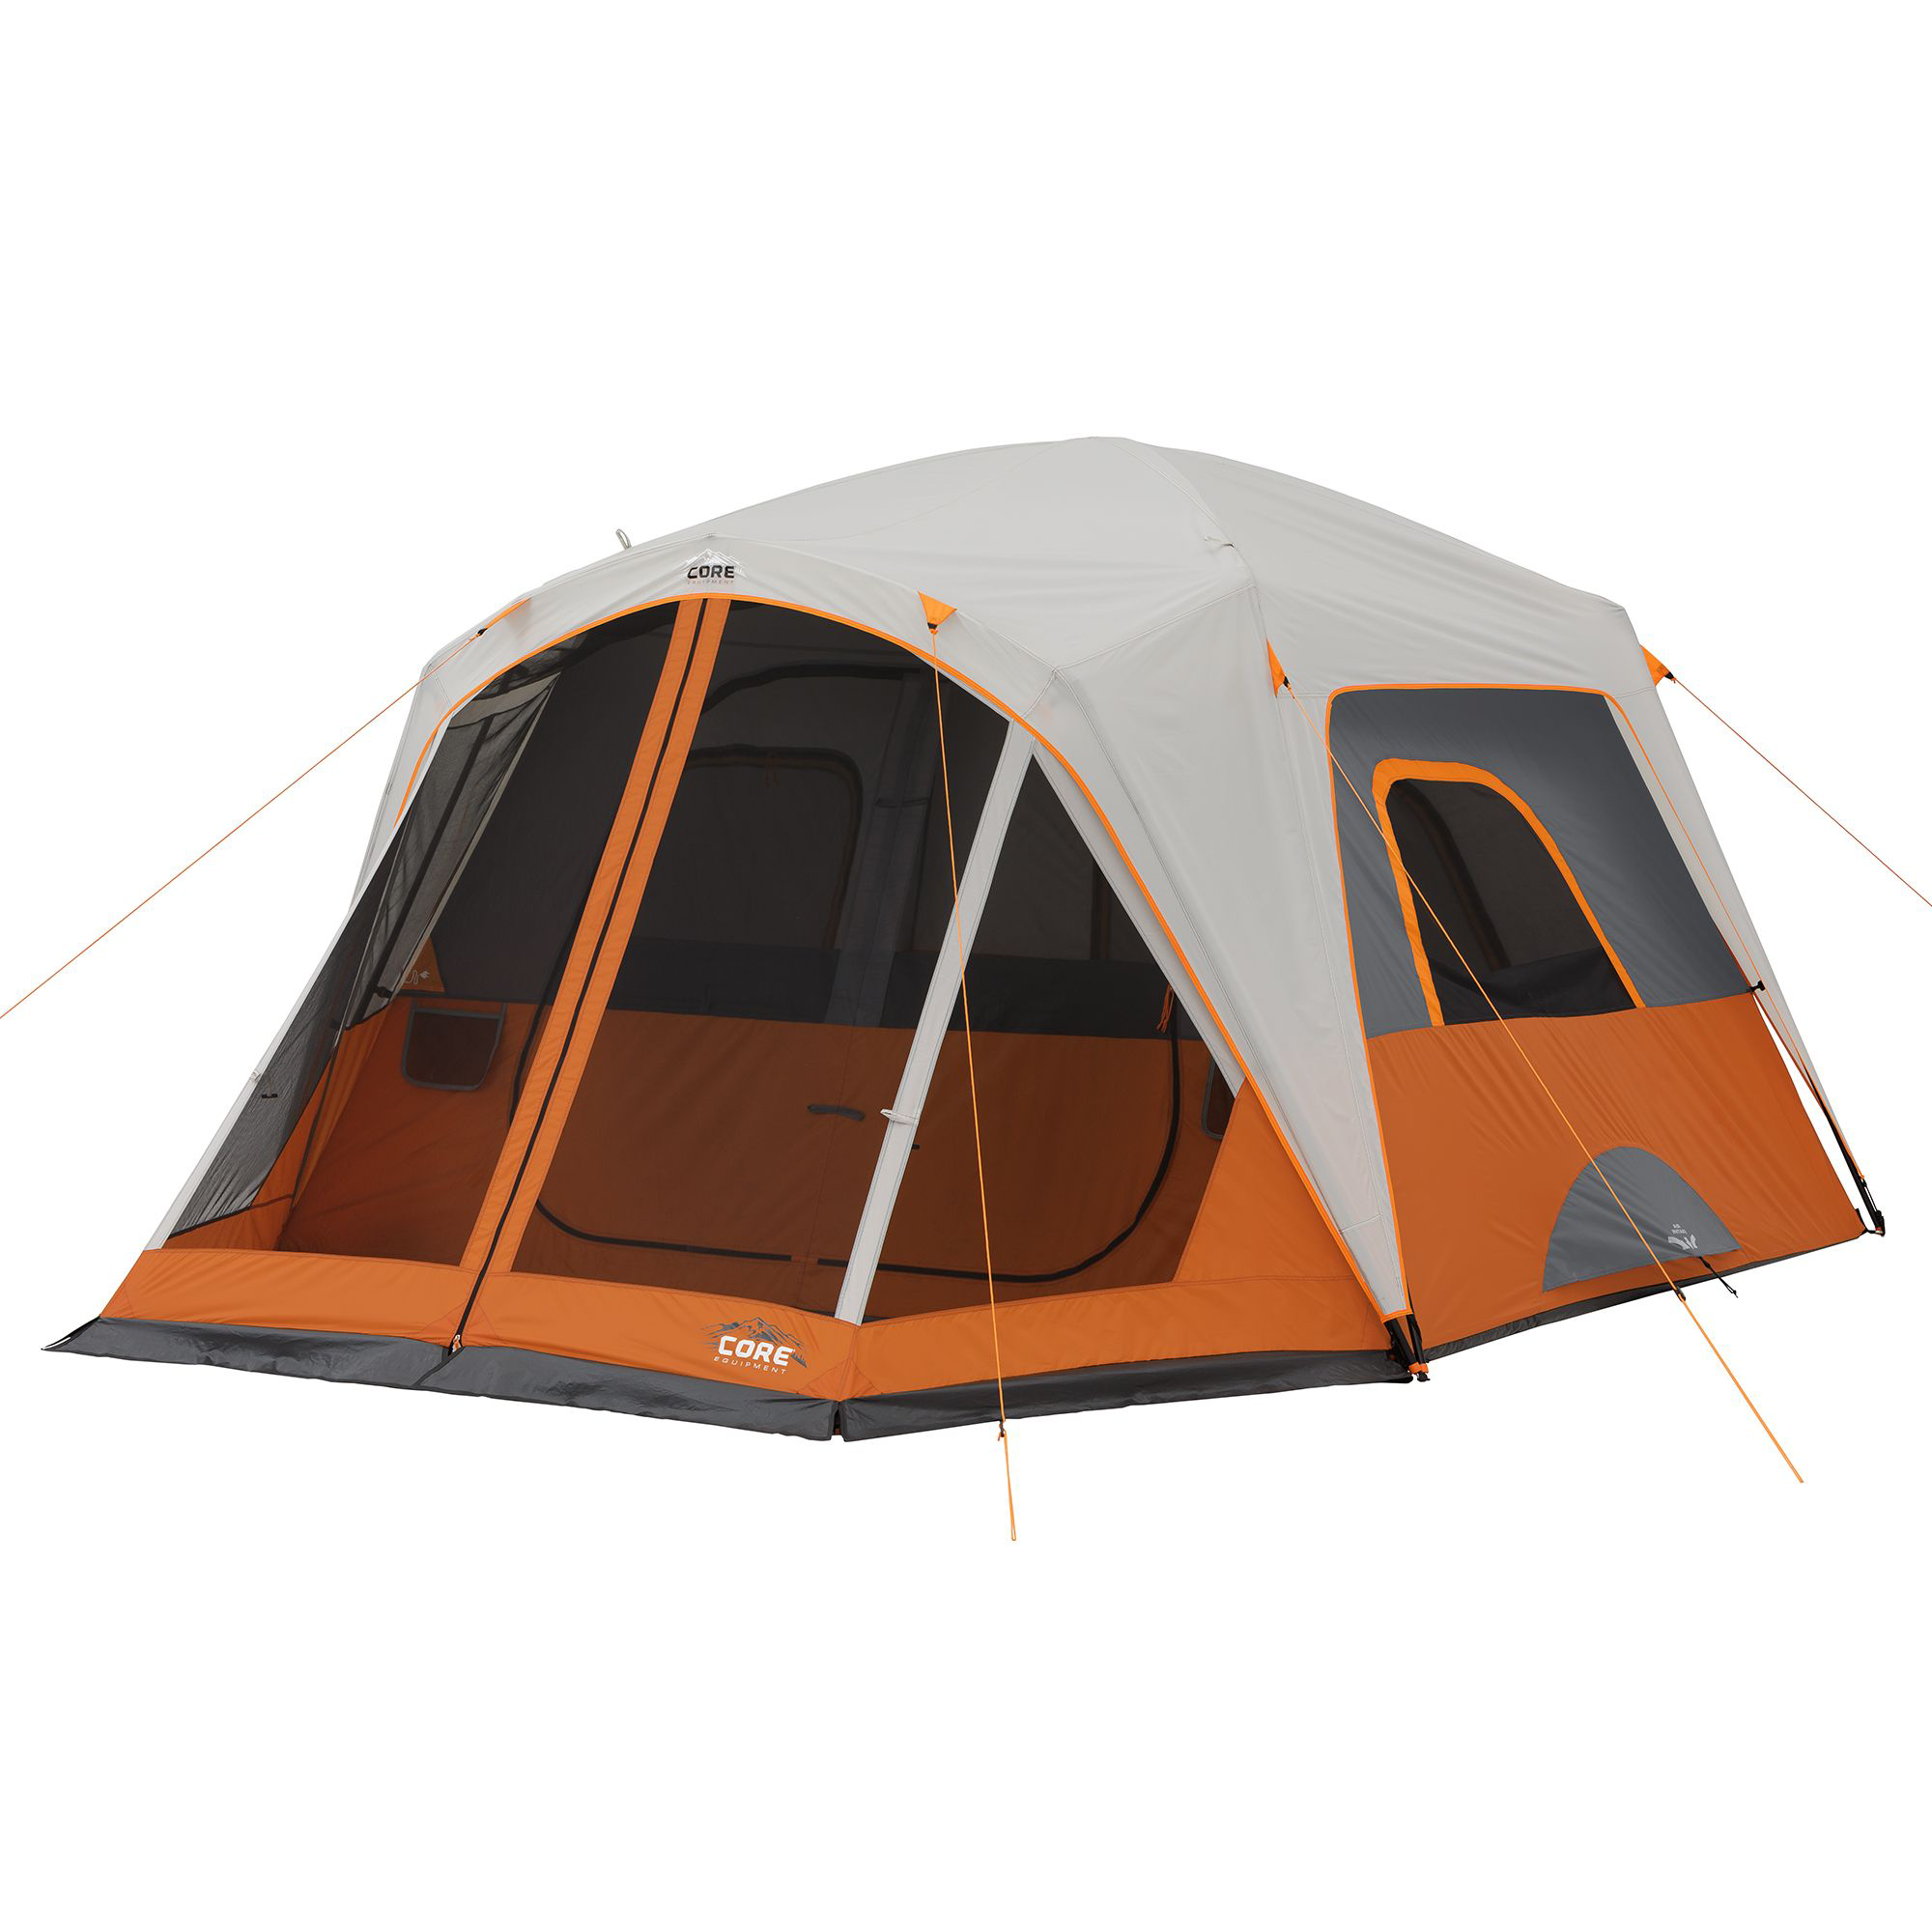 CORE 4 Person / 6 Person Straight Wall Cabin Tents (4 Person) - Nature tee